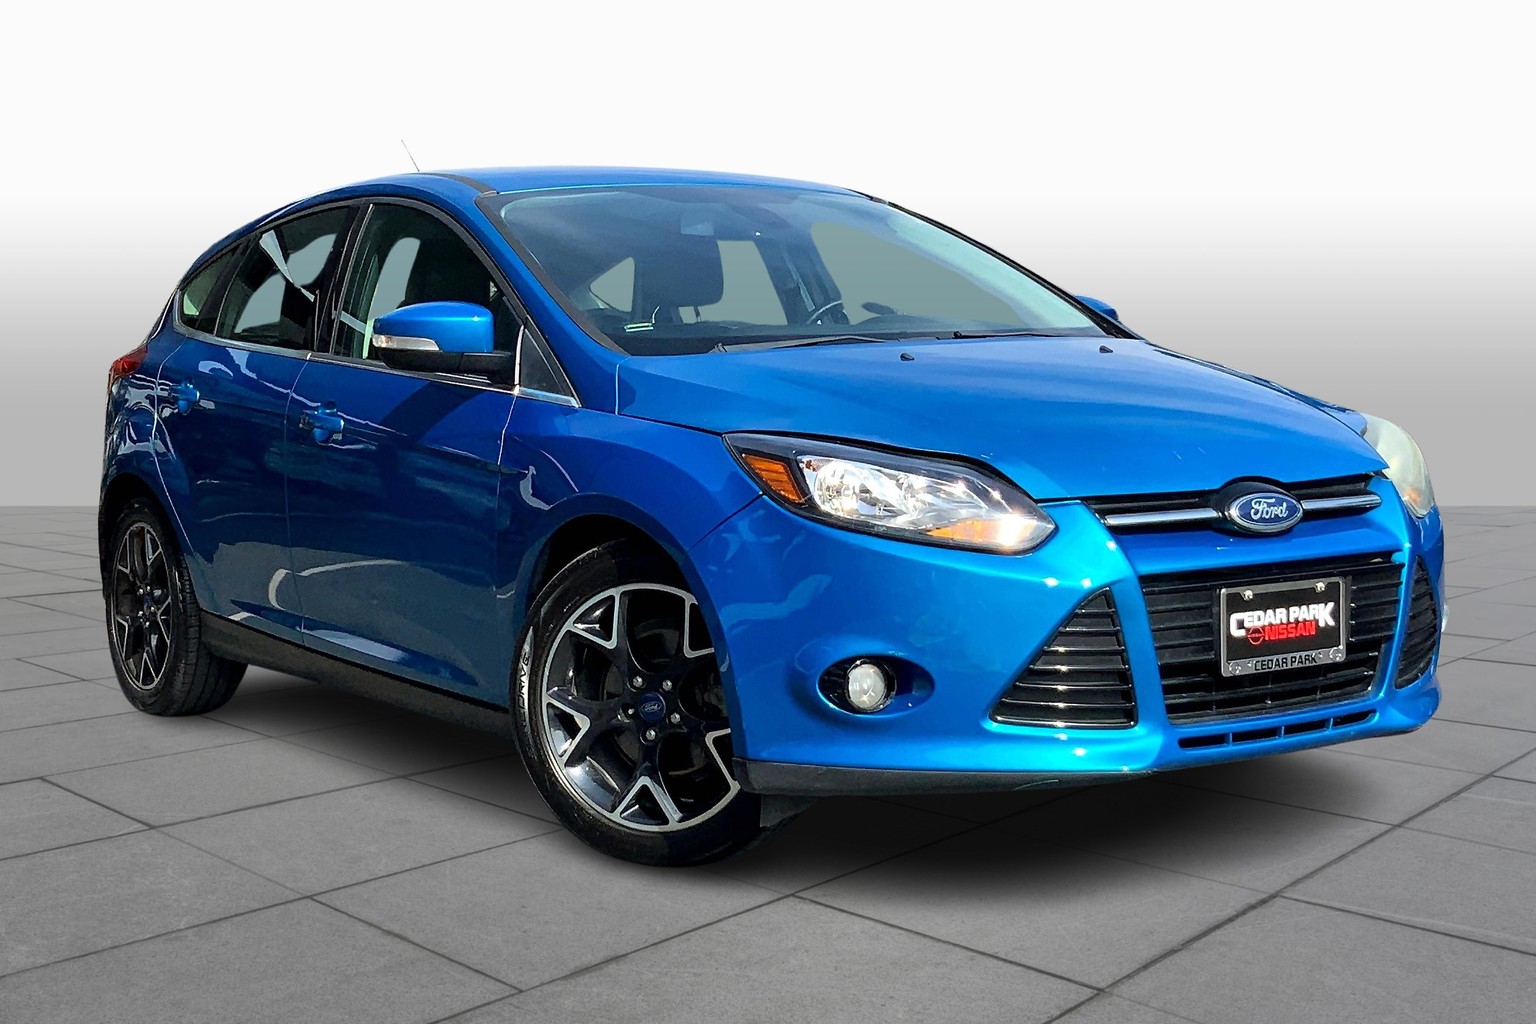 Used 2012 Ford Focus Titanium with VIN 1FAHP3N2XCL278603 for sale in Cedar Park, TX